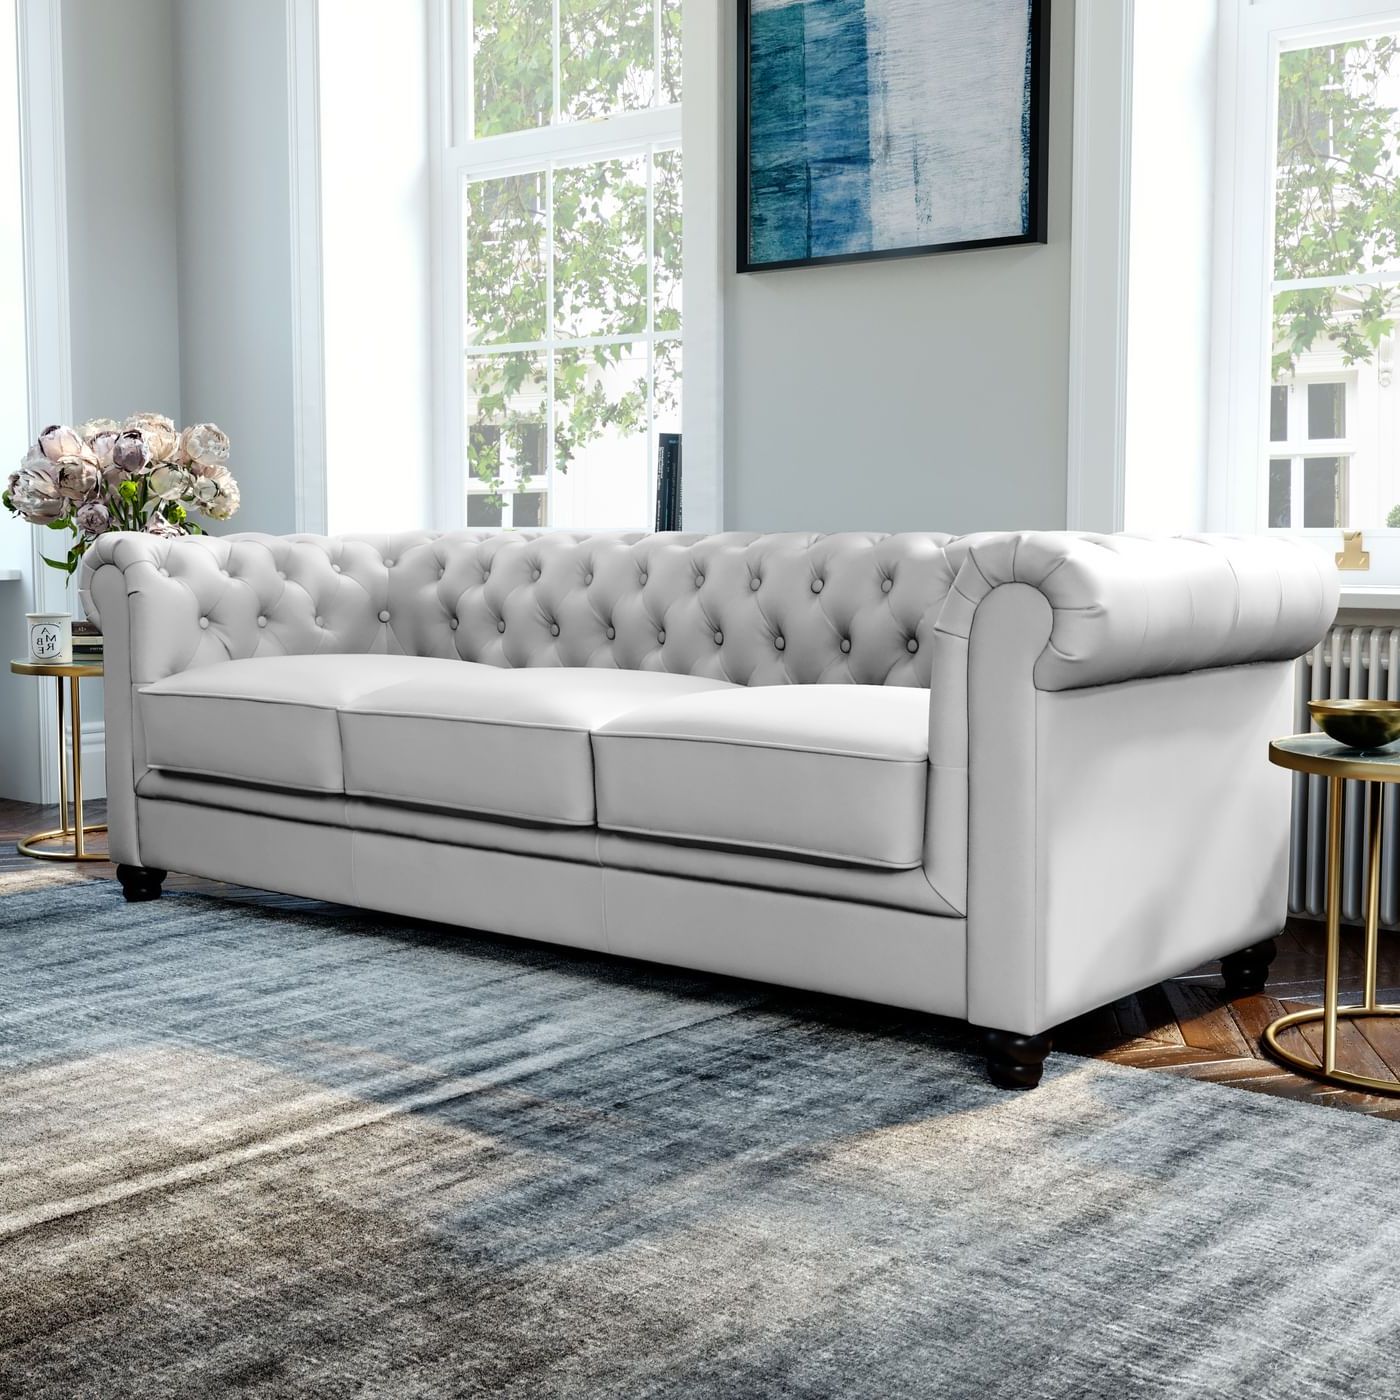 Hampton Light Grey Leather 3 Seater Chesterfield Sofa | Furniture Choice In Sofas In Light Gray (View 2 of 20)